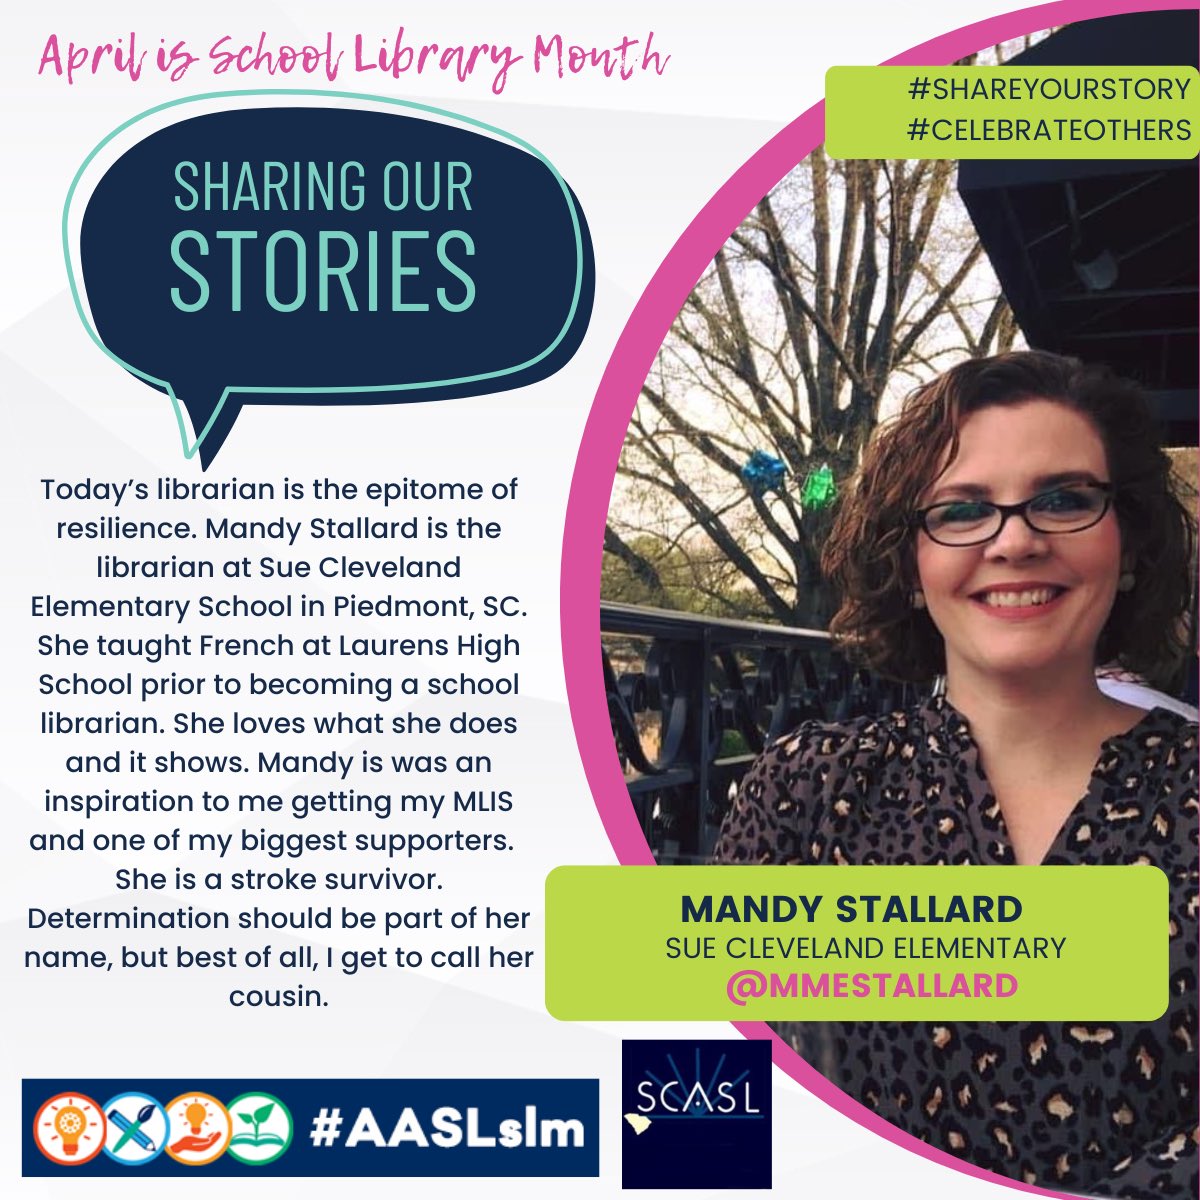 Today it brings me great honor to introduce Mandy Stallard to you as I continue celebrate  school librarians during #AASLSchoolLibraryMonth! Read about Mandy below. #determination #sueclevelandelementary #StrokeSurvivor #SCASL @SueClevelandES